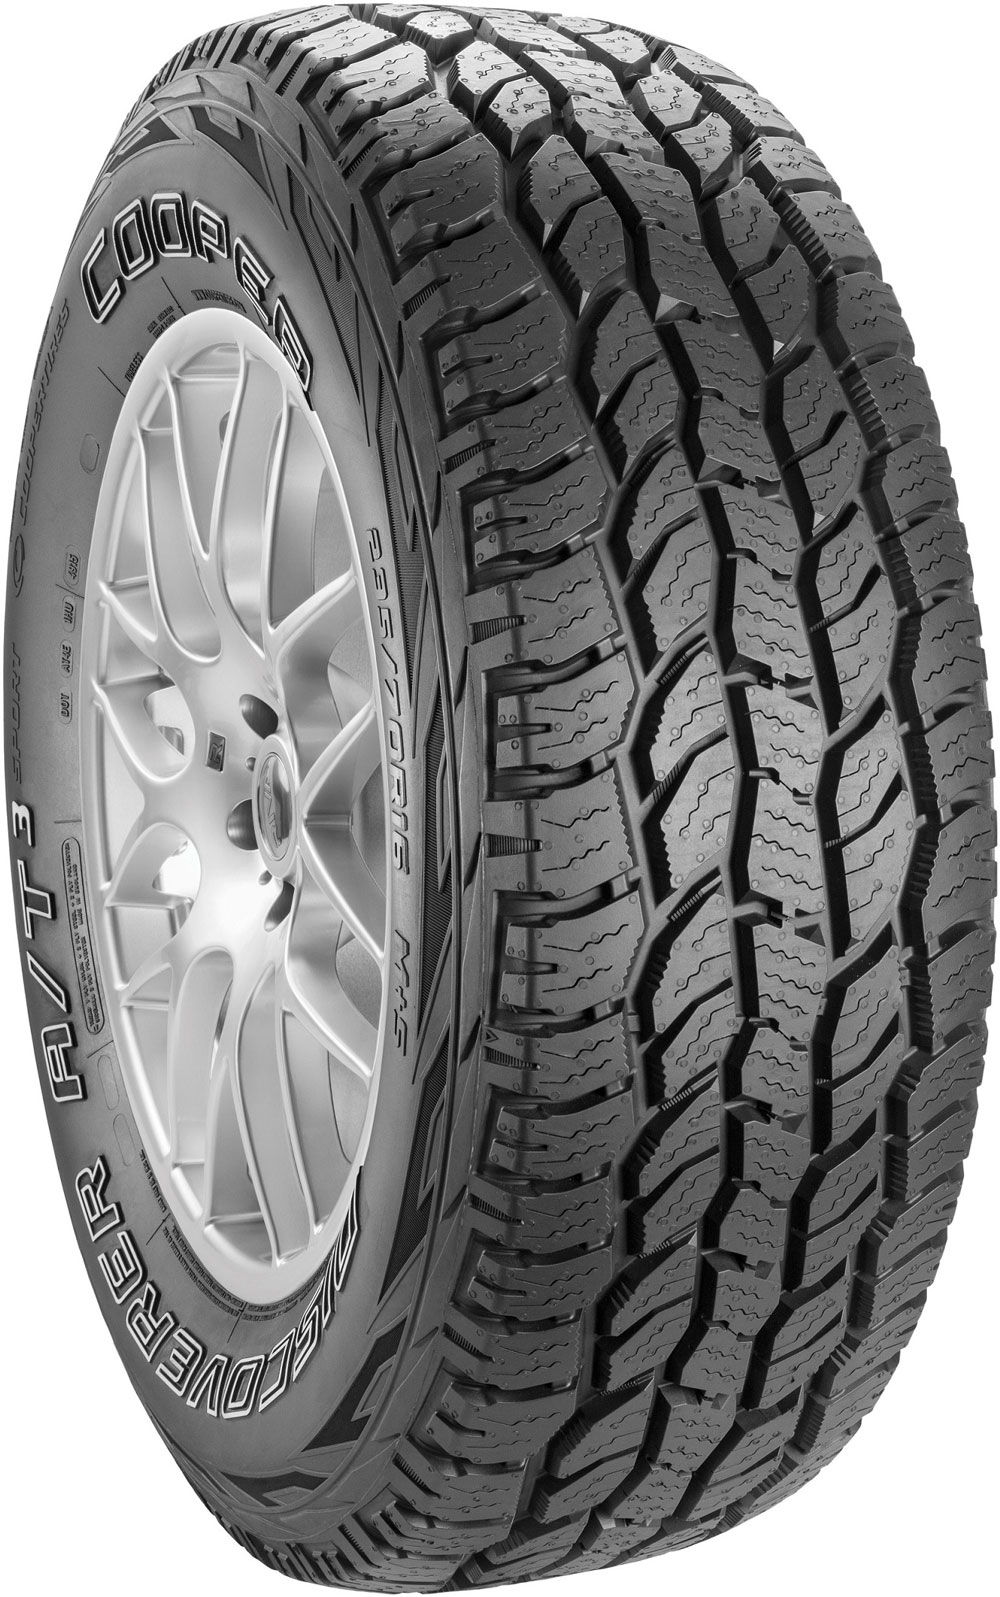 COOPER DISCOVERER A/T3 SPORT BSW XL 235/70 R17 111T